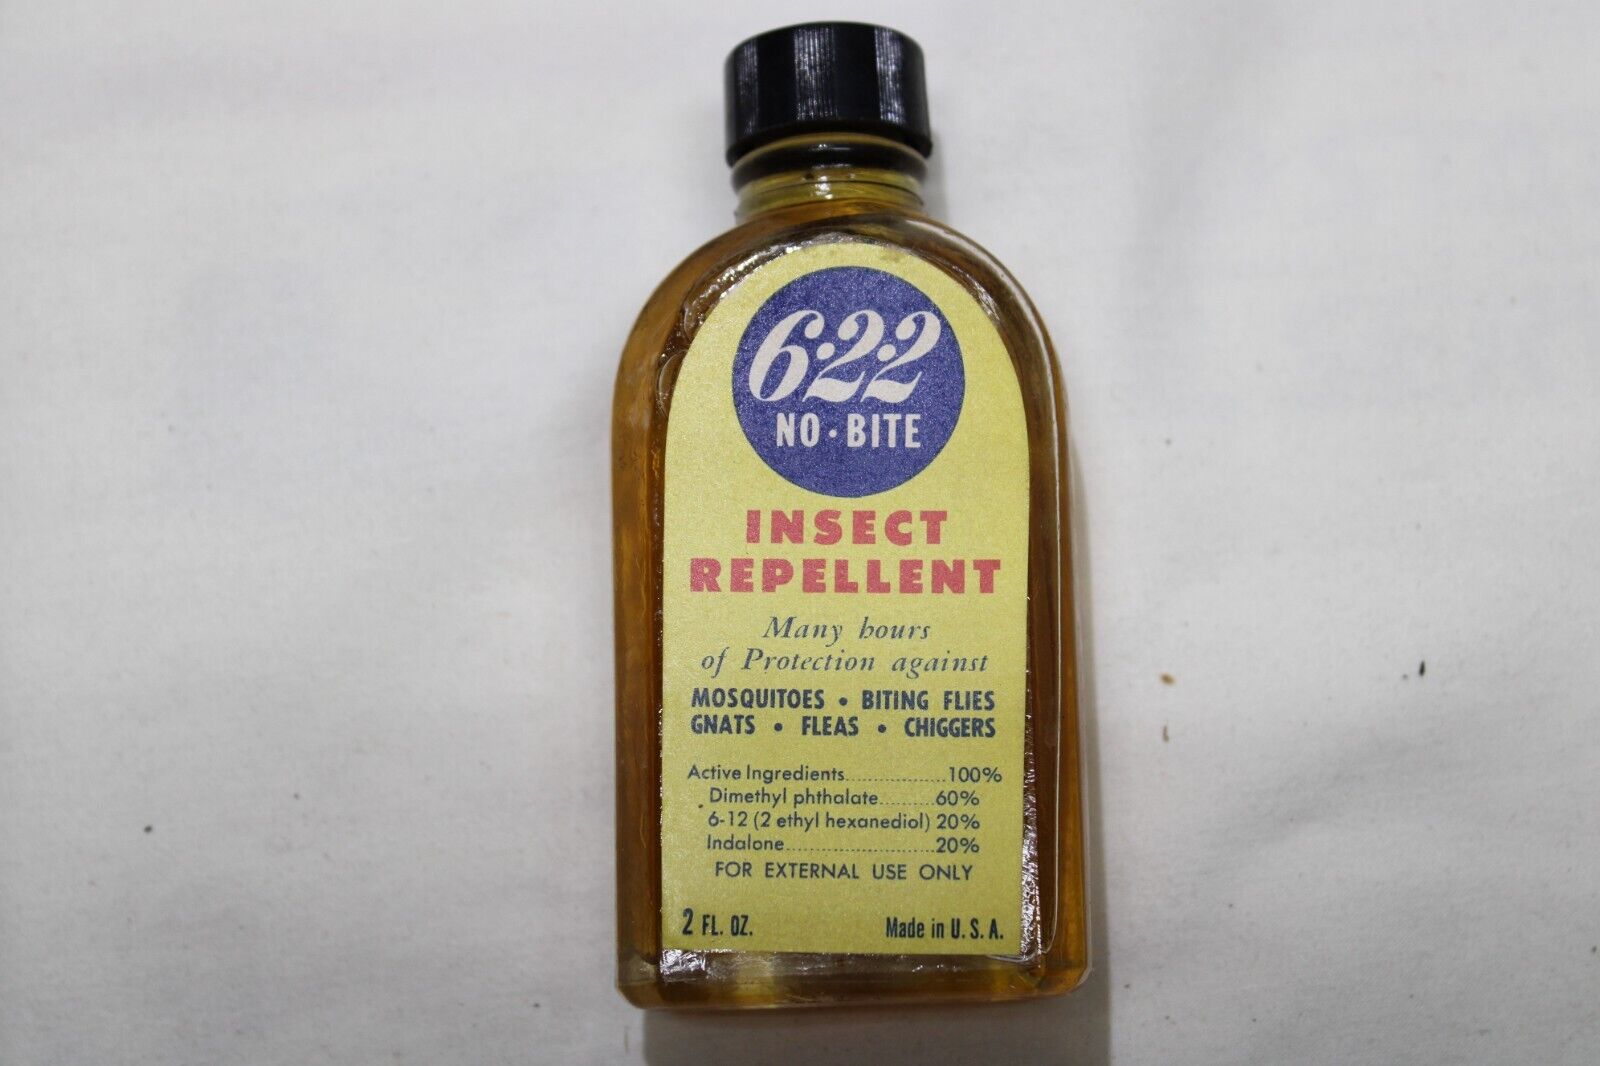 US Military Issue WWII WW2 USMC Army Insect Repellent NOS Full Bottle 622 NoBite